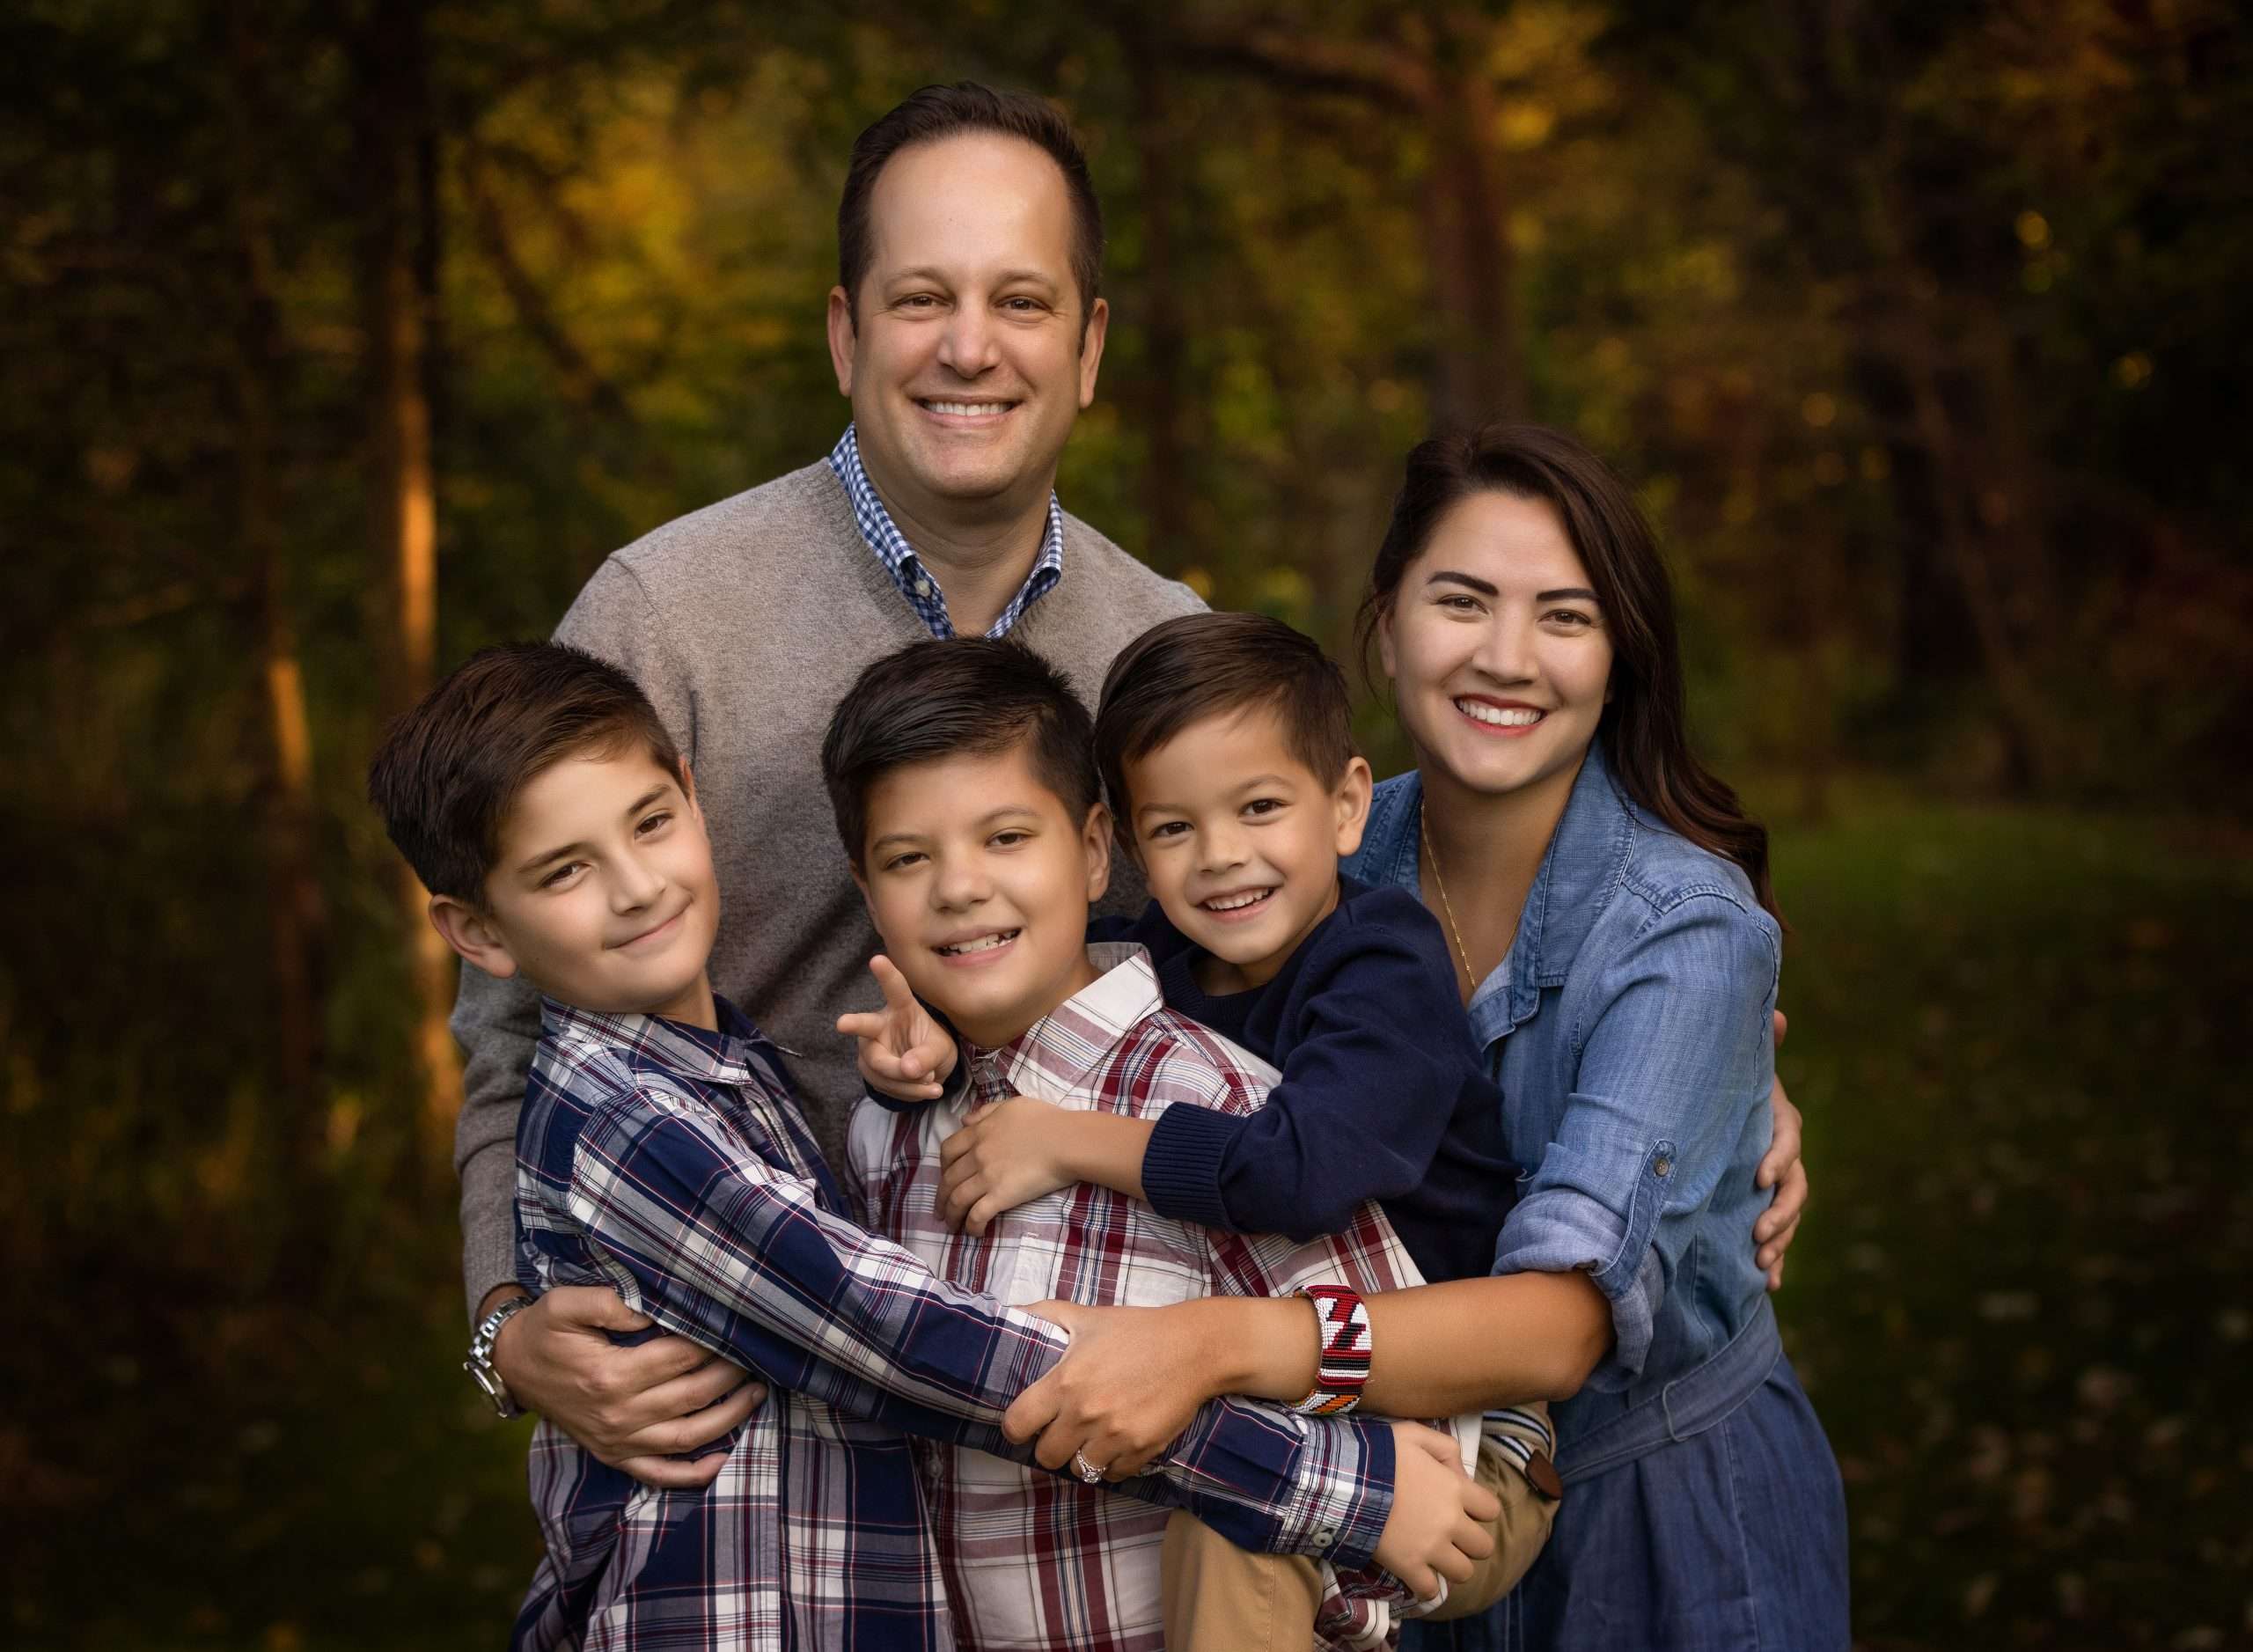 family photography in Columbus OH, Upper Arlington OH family photographer, professional family photos